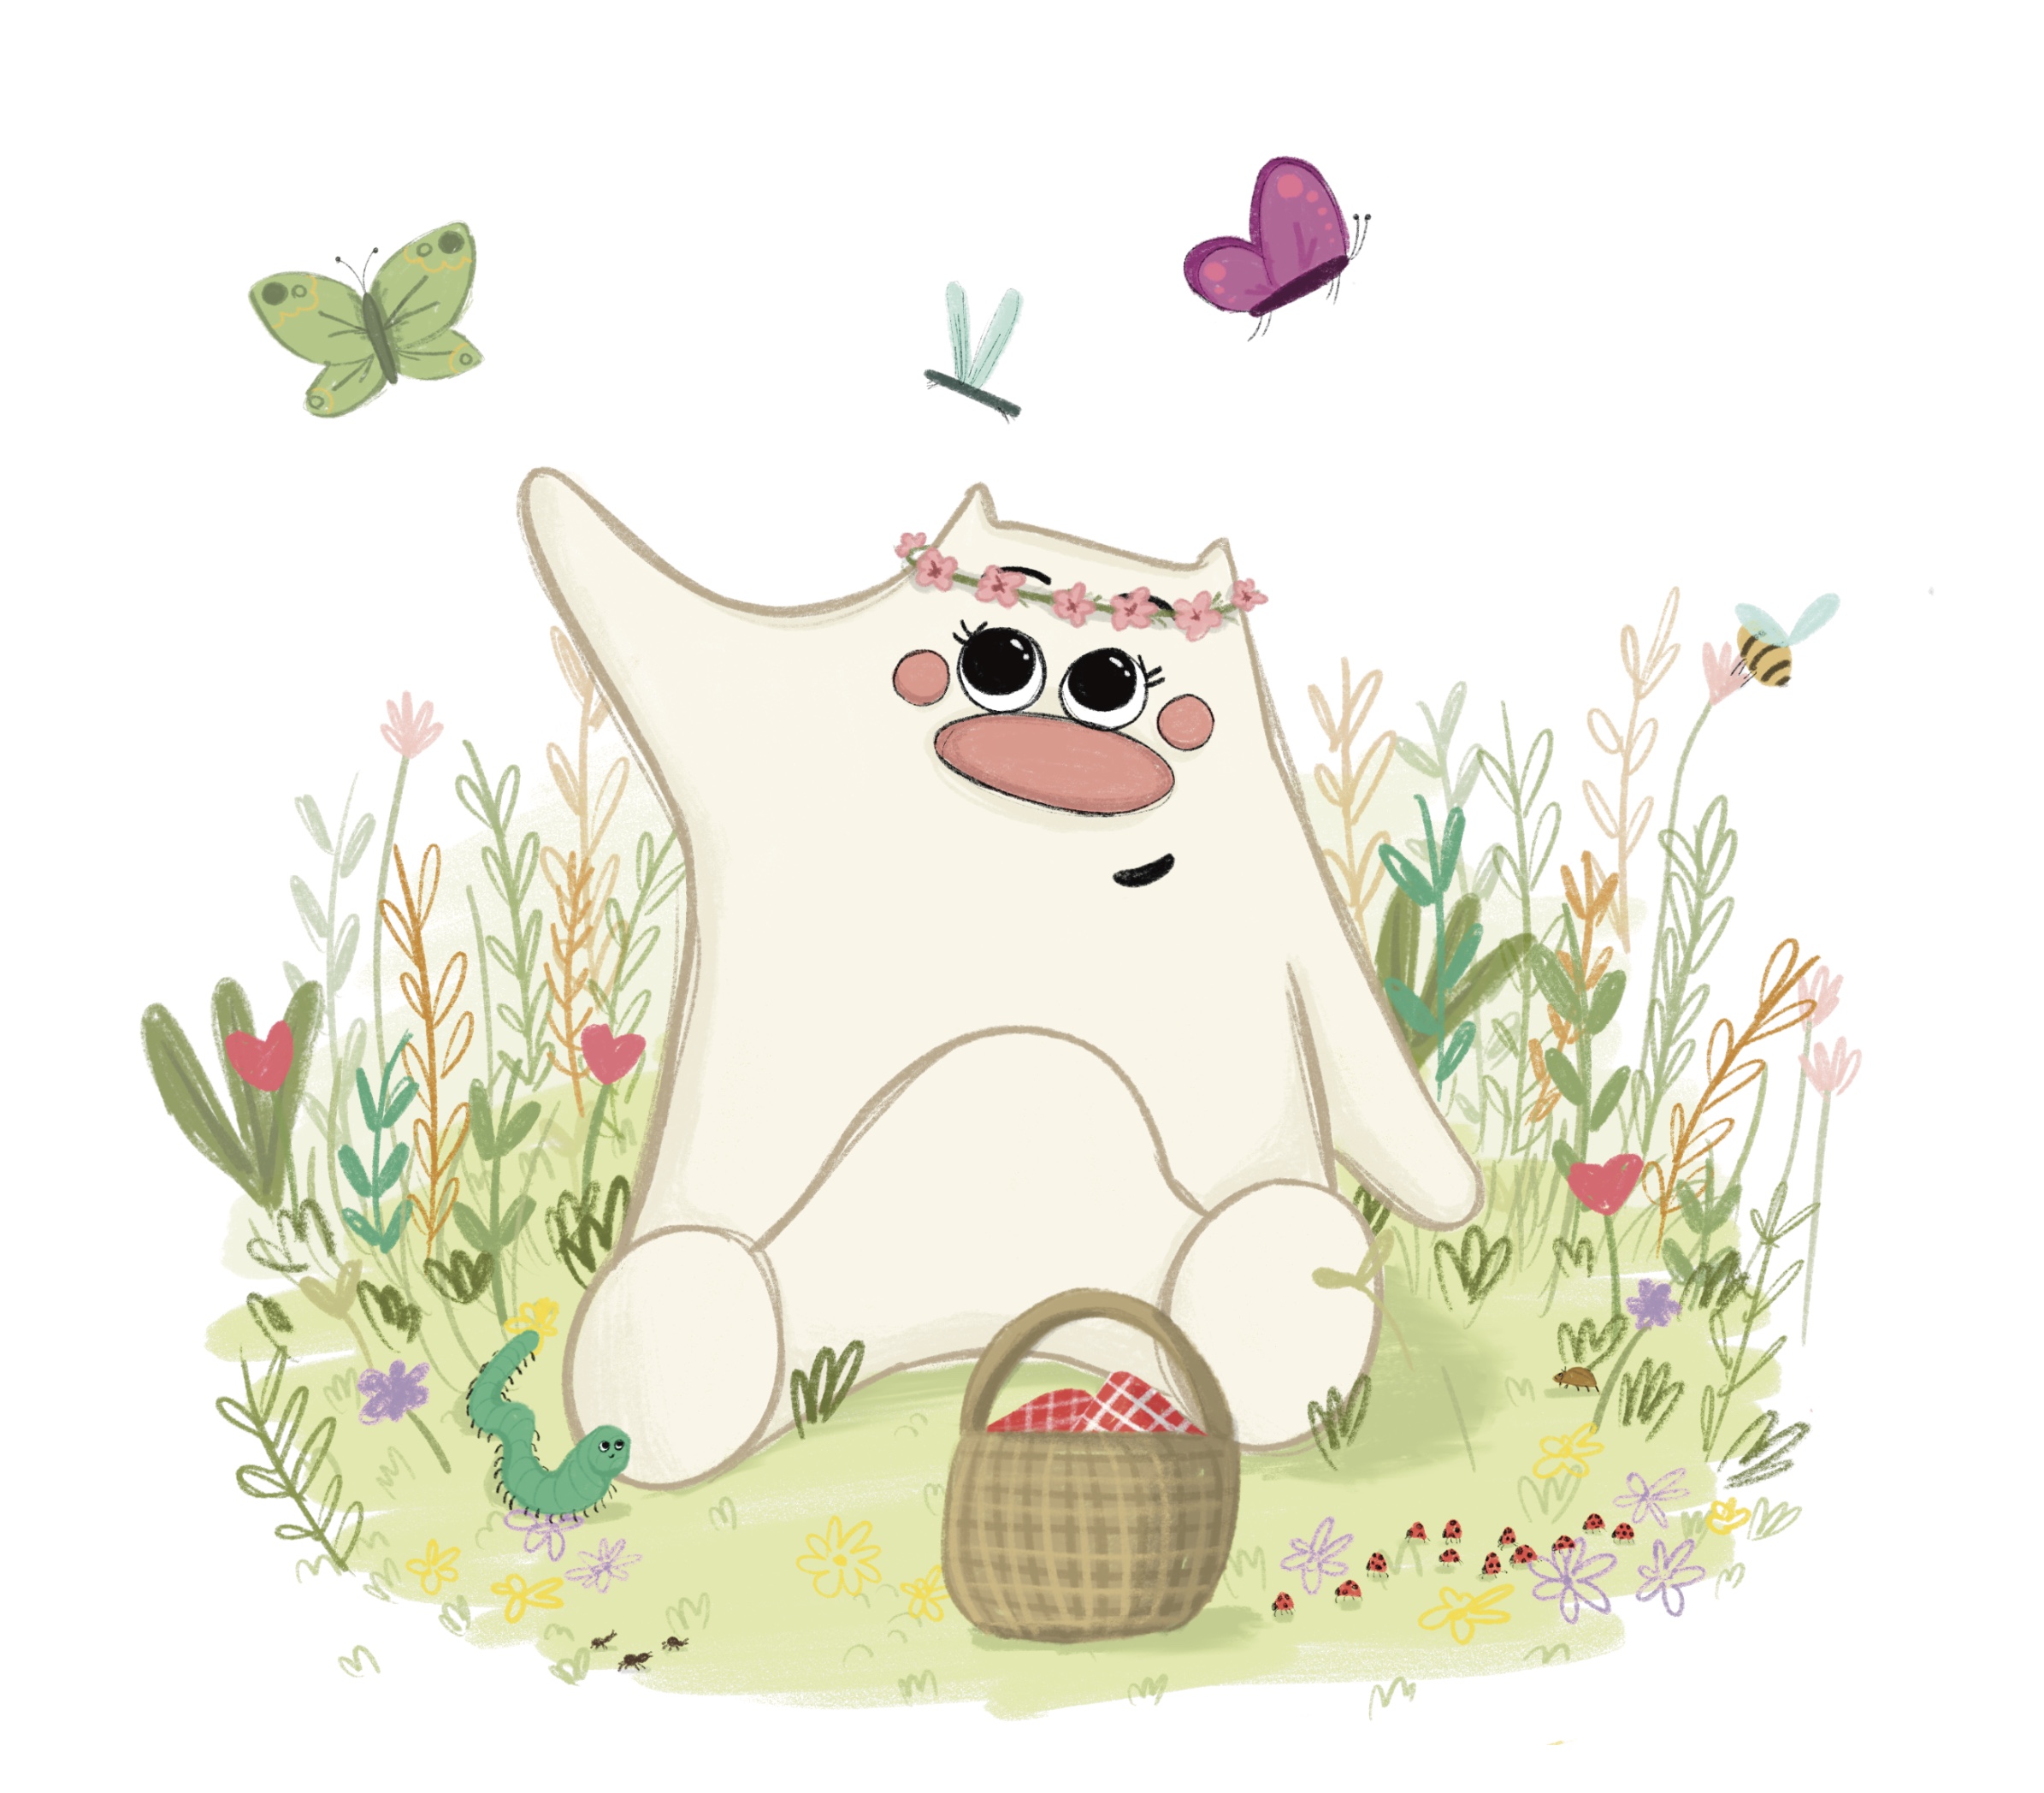 A spot illustration by Maddie Russell showing the Arbee character playing outside with animals.